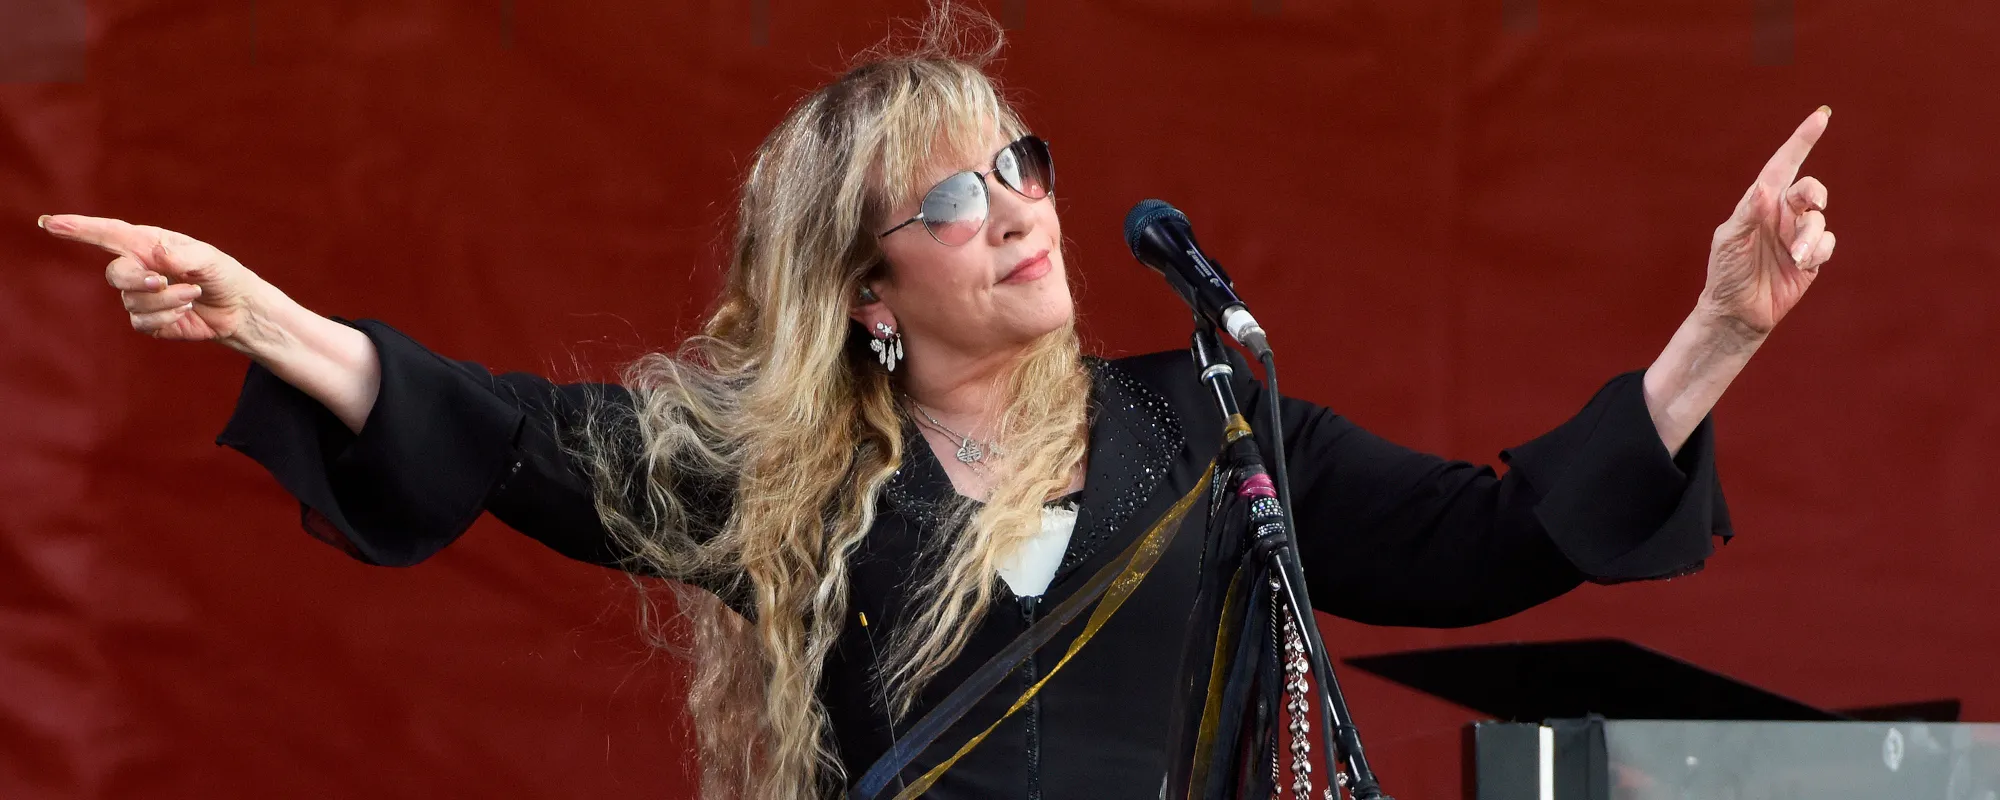 Stevie Nicks and Billy Joel Announce Co-Headlining Show – “Two Icons, One Night”